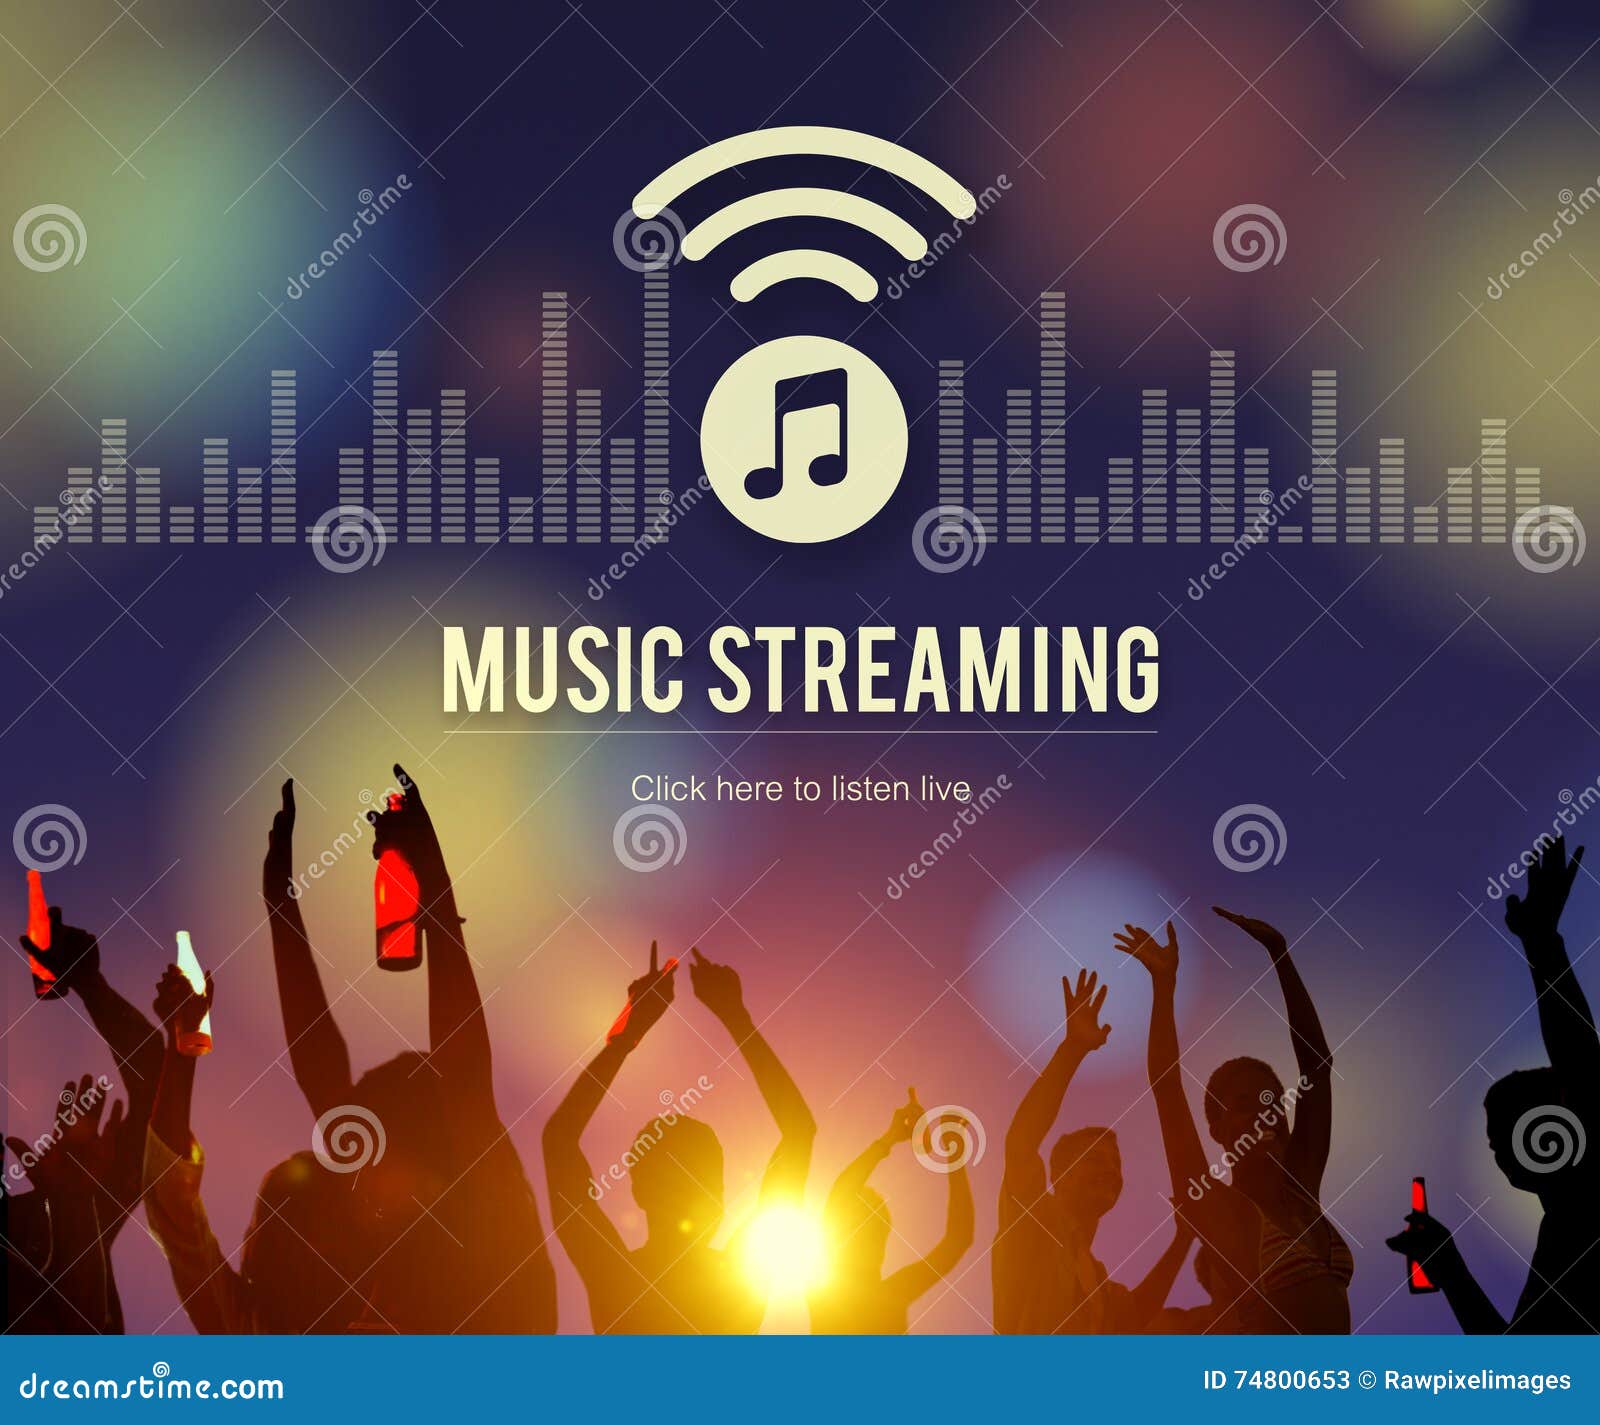 music-streaming-media-entertainment-download-equalizer-concept-74800653.jpg